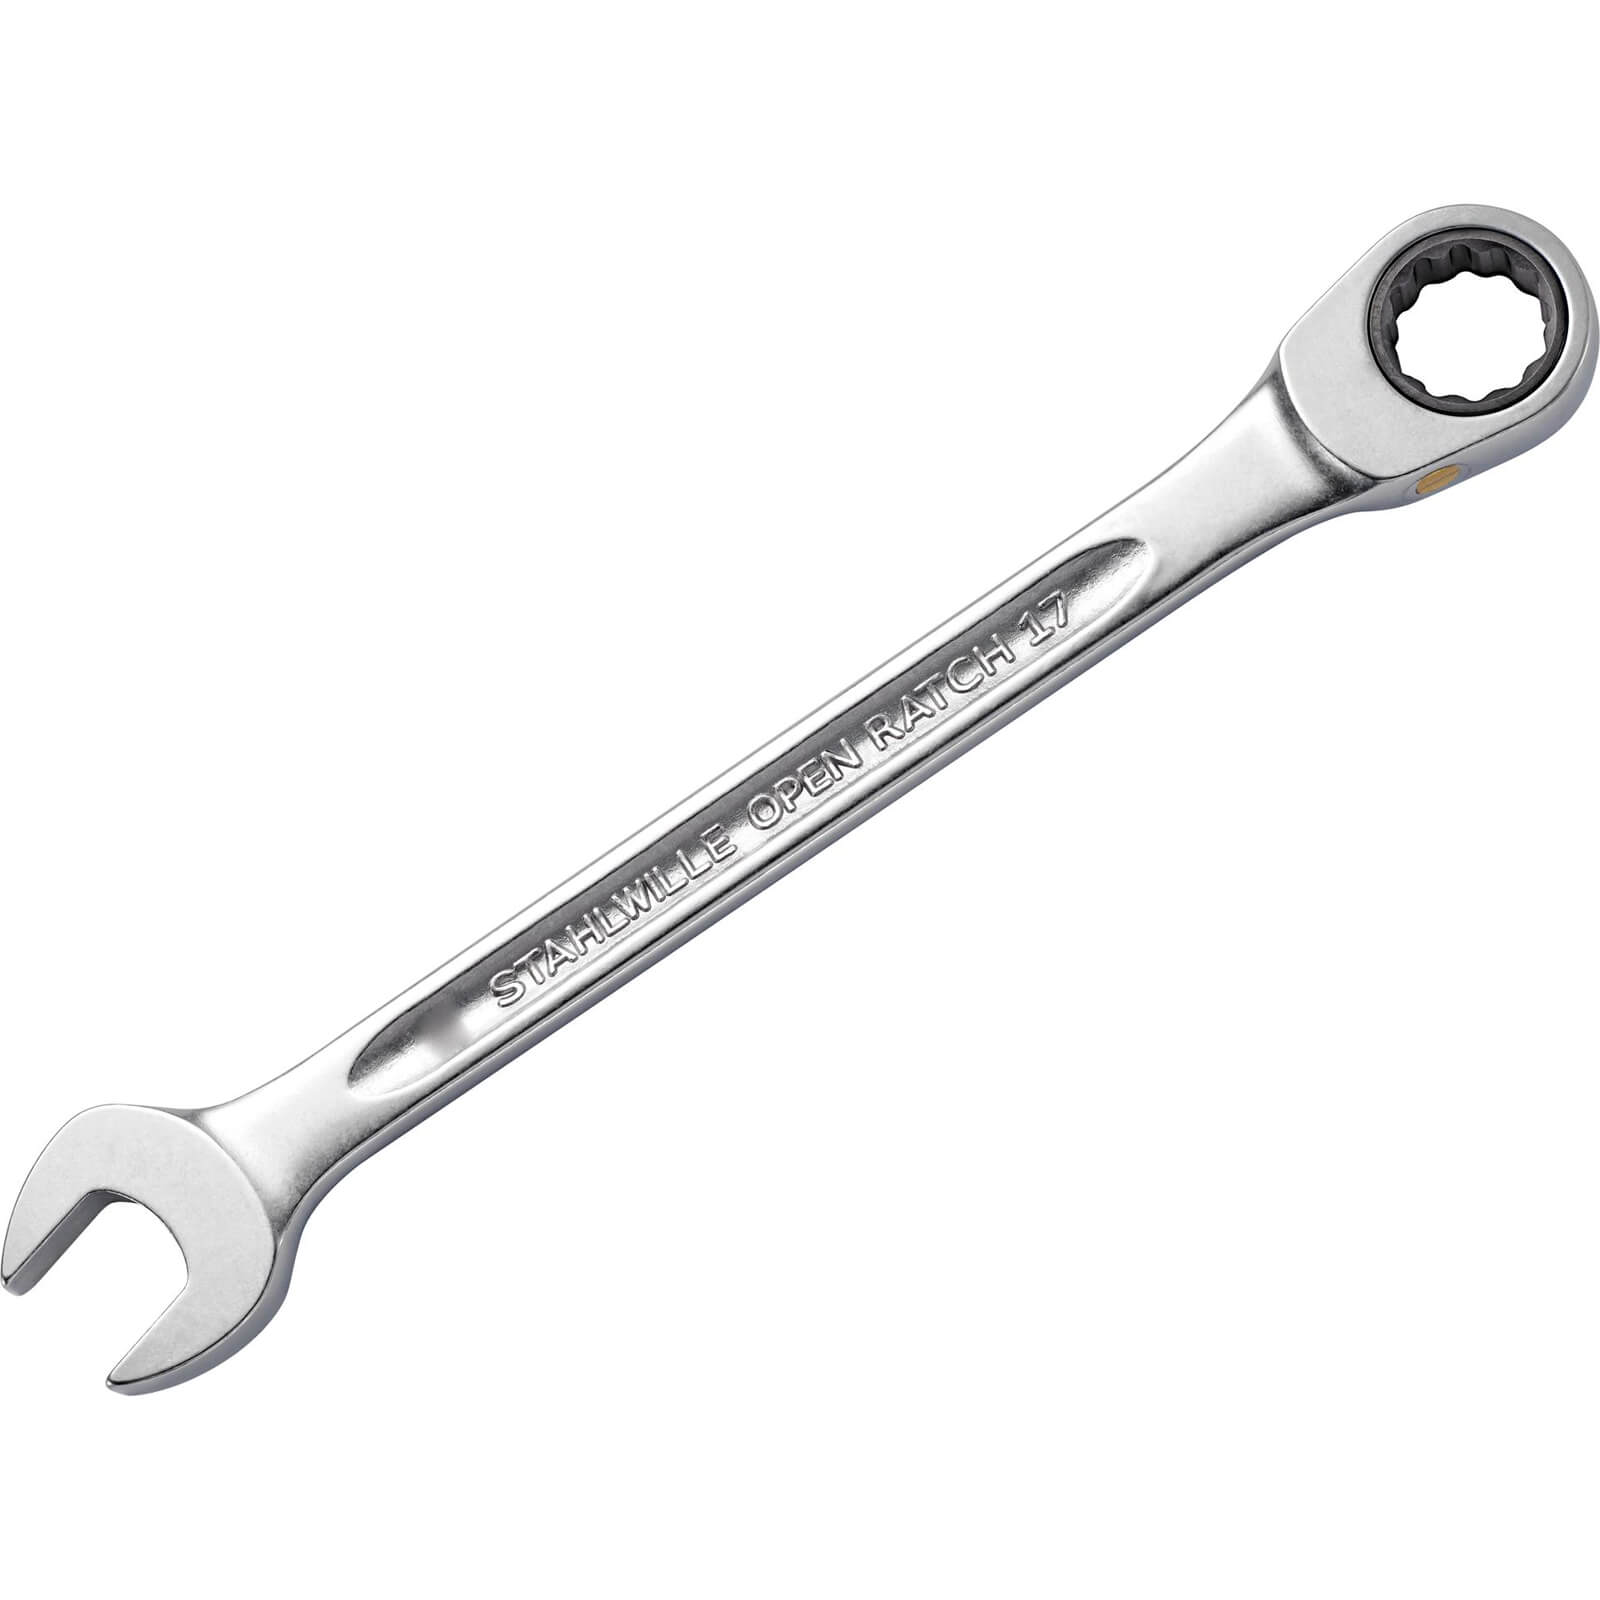 Image of Stahlwille 17F Ratchet Combination Spanner 24mm